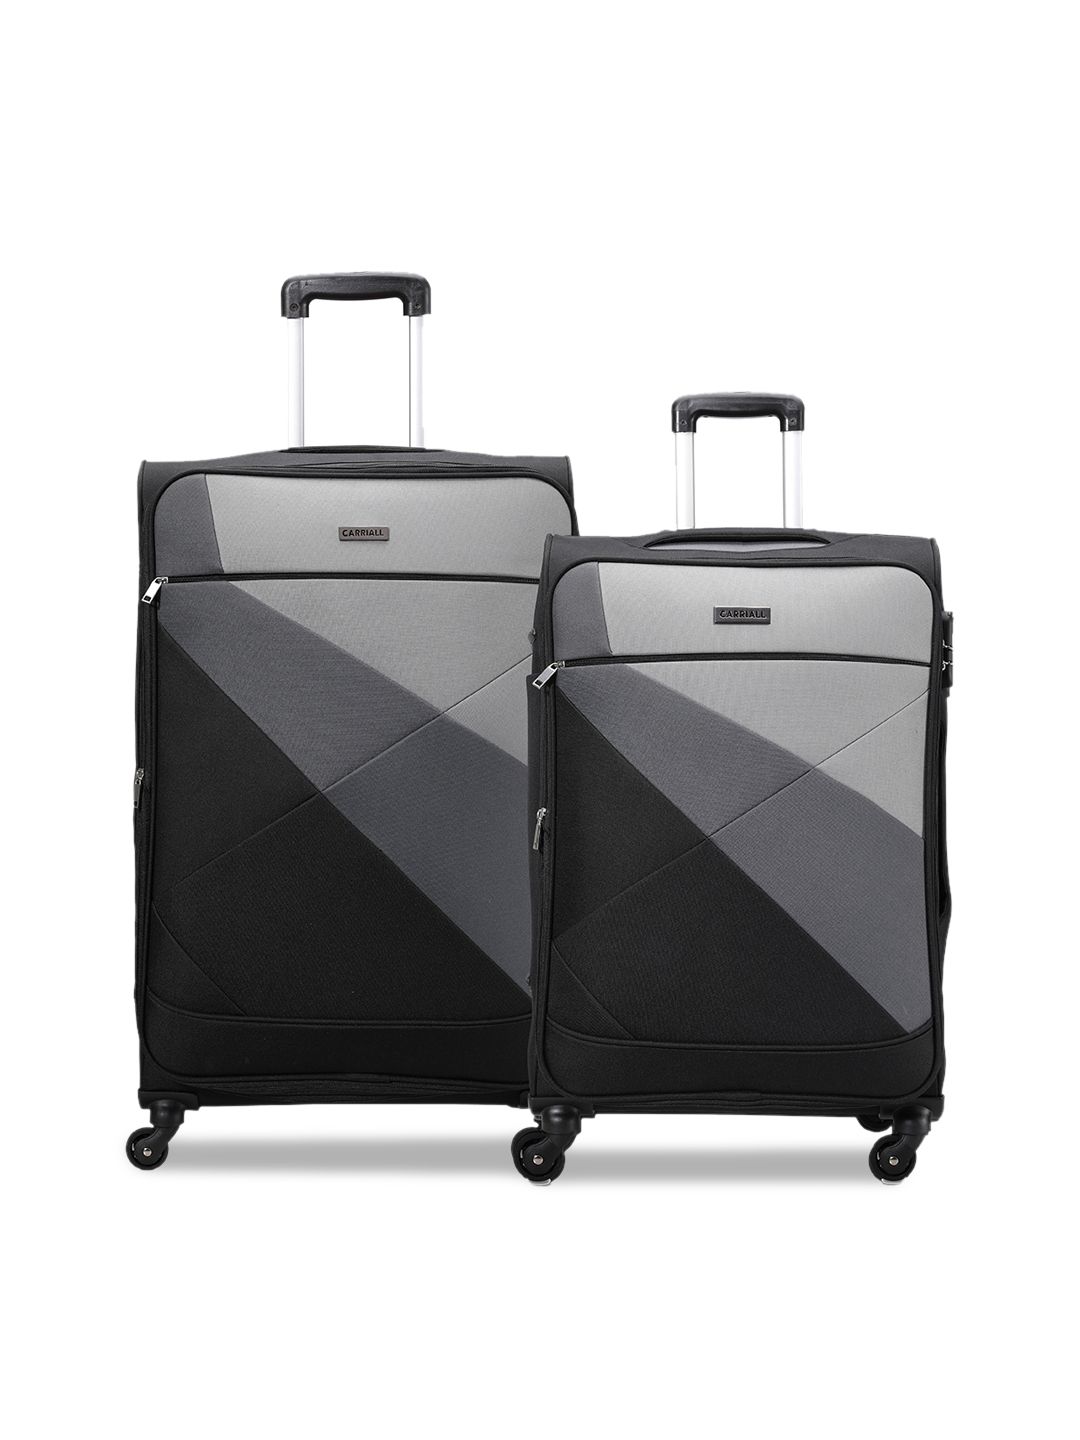 CARRIALL Set Of 2 Black & Grey Colourblocked Soft-Sided Trolley Suitcases Price in India